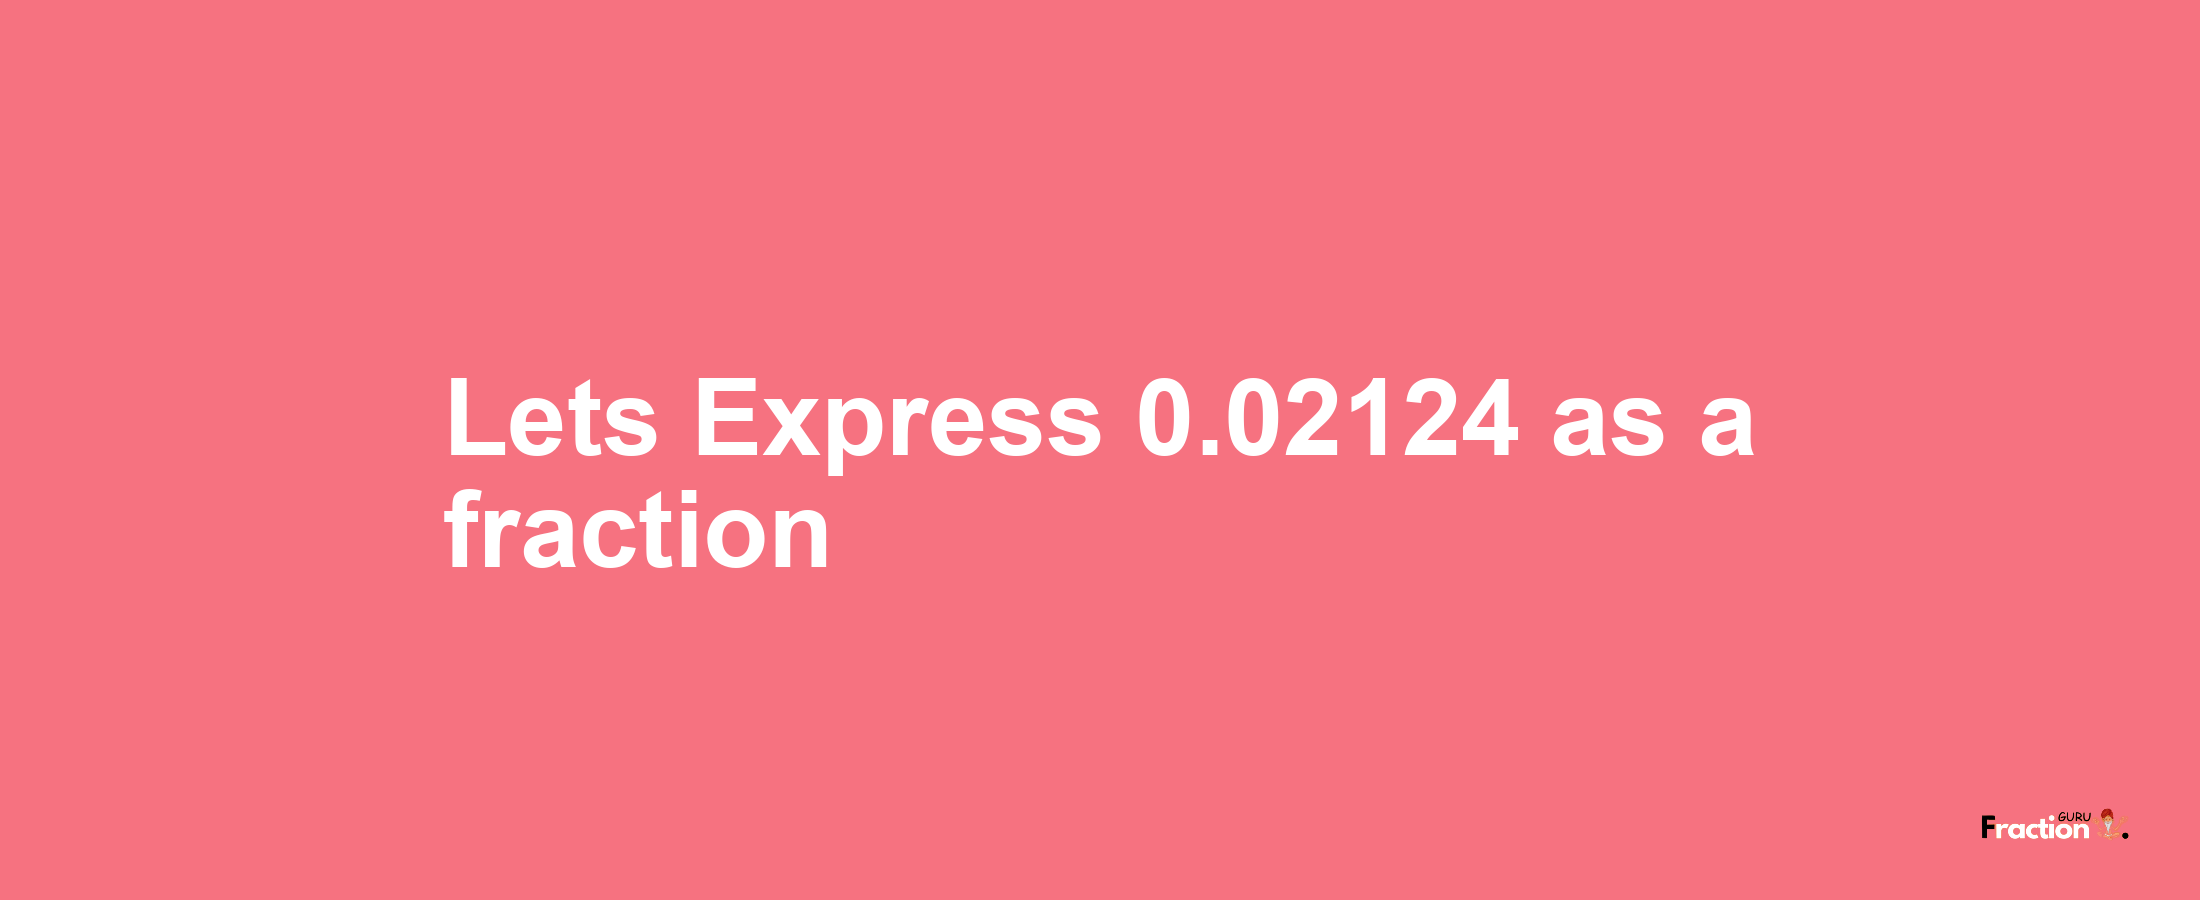 Lets Express 0.02124 as afraction